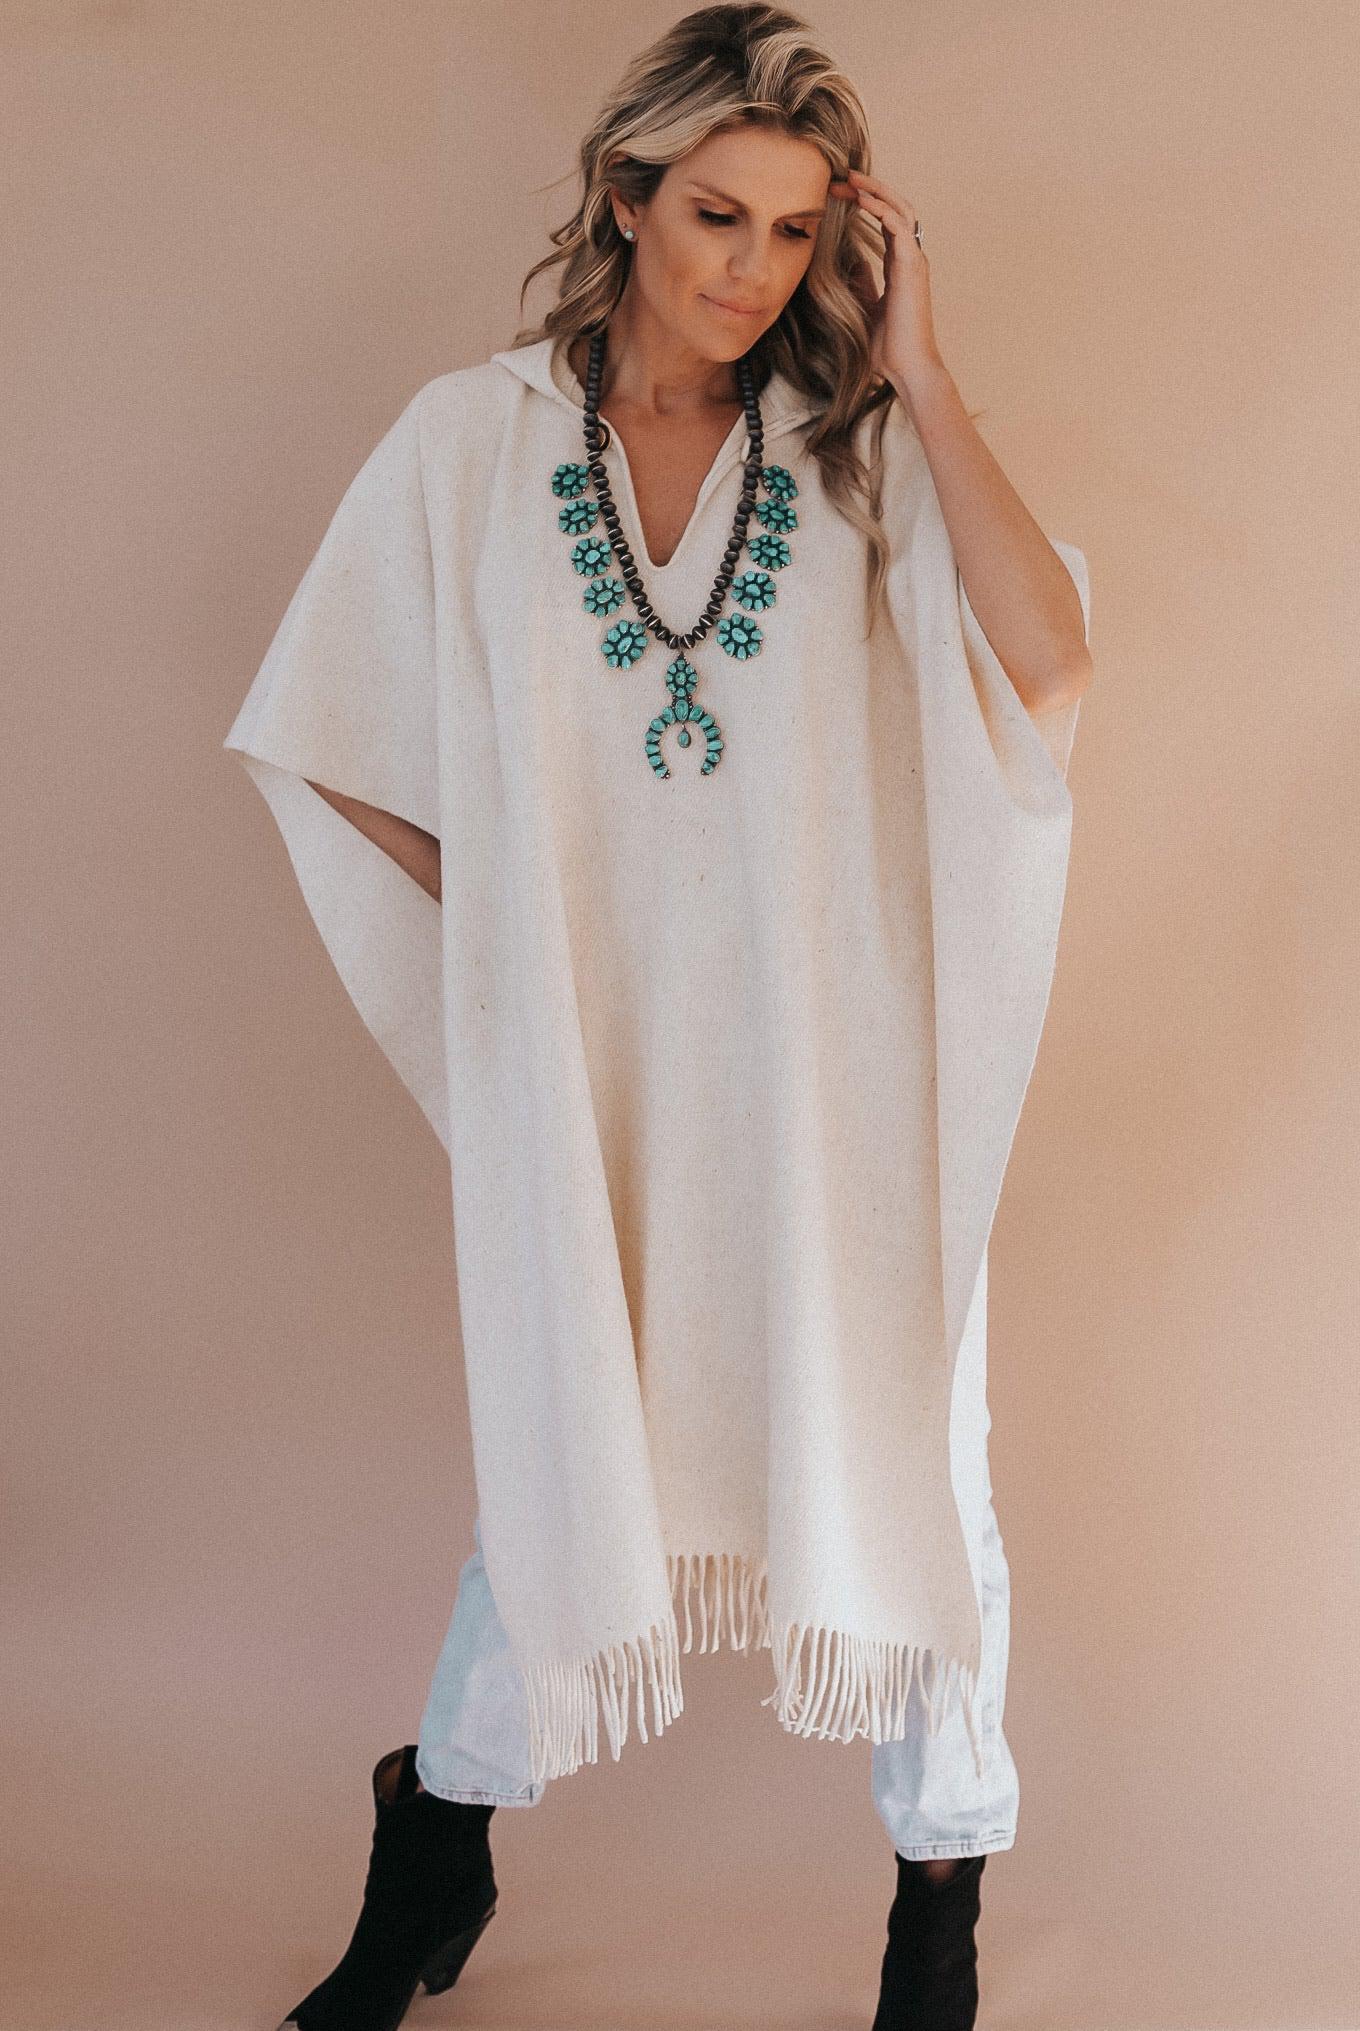 Sanctuary Wool Cape with Hood Off White-Poncho-Good Tidings